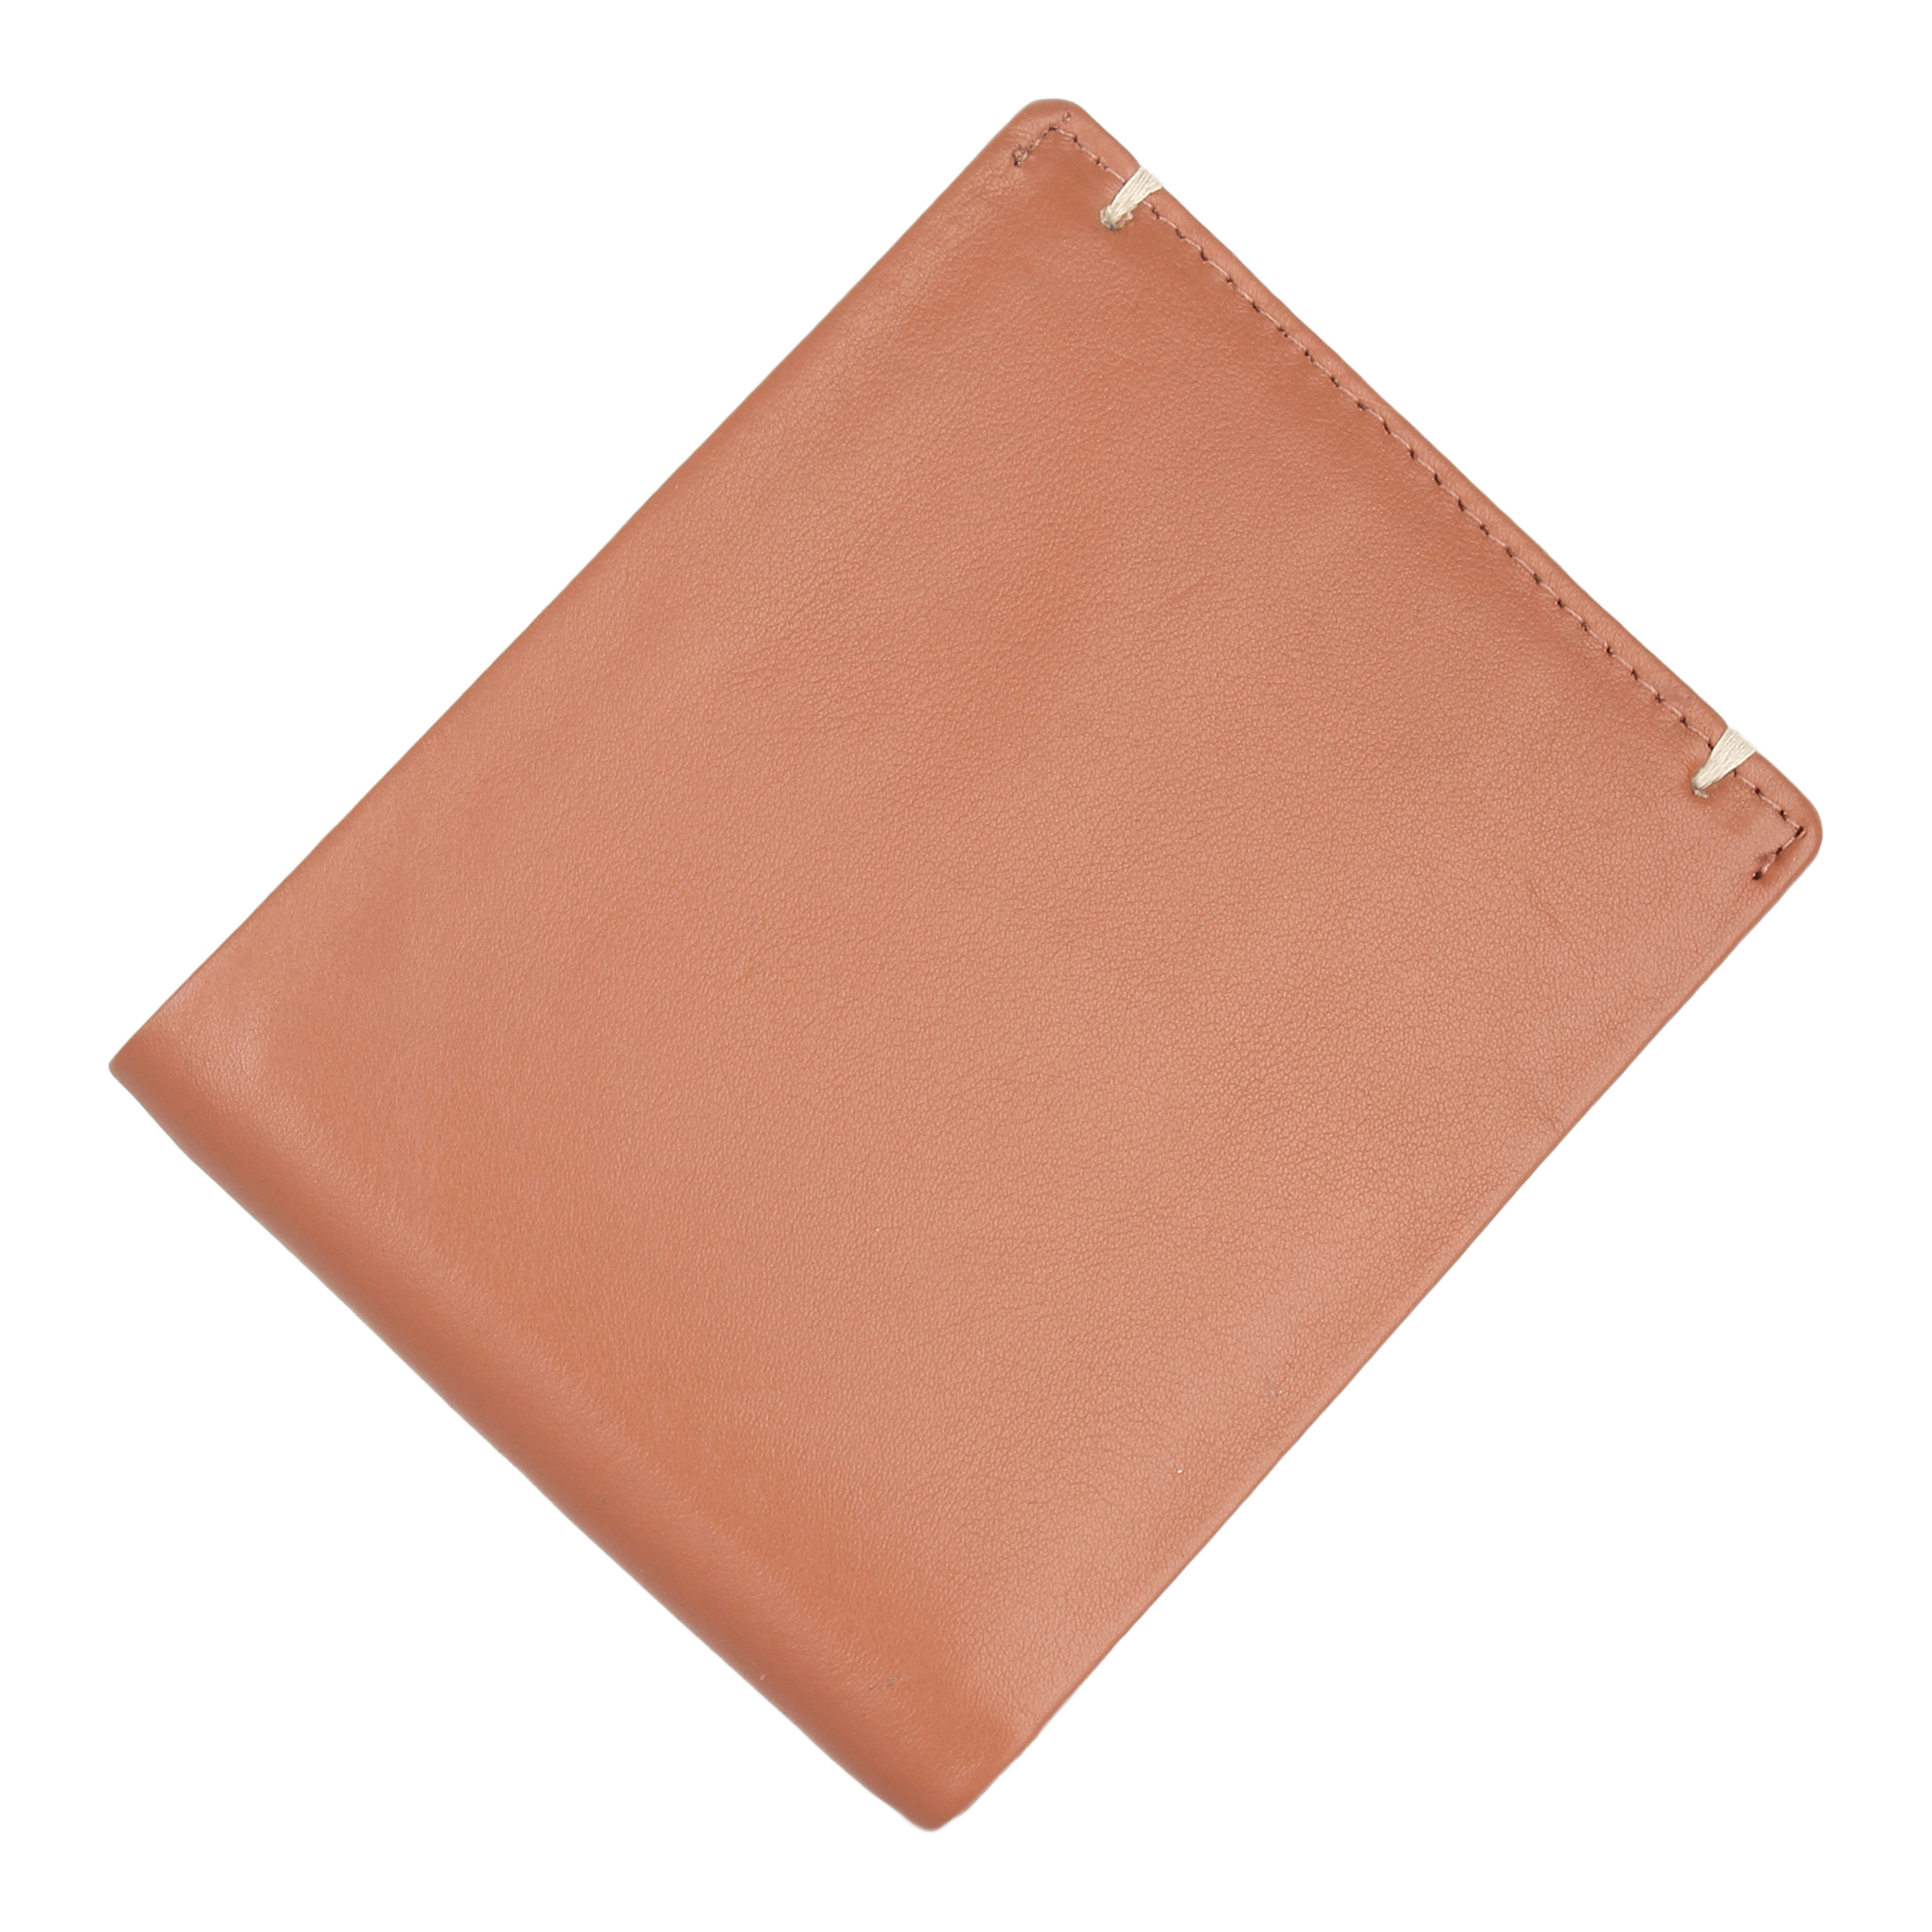 Genuine Leather Wallets Manufacturers in Delhi, Leather Wallets Importers in Delhi, Leather Wallets Suppliers in Delhi, Leather Wallets Wholesalers in Delhi, Leather Wallets Traders in Delhi, custom leather wallet manufacturers in Delhi, Leather Wallets B